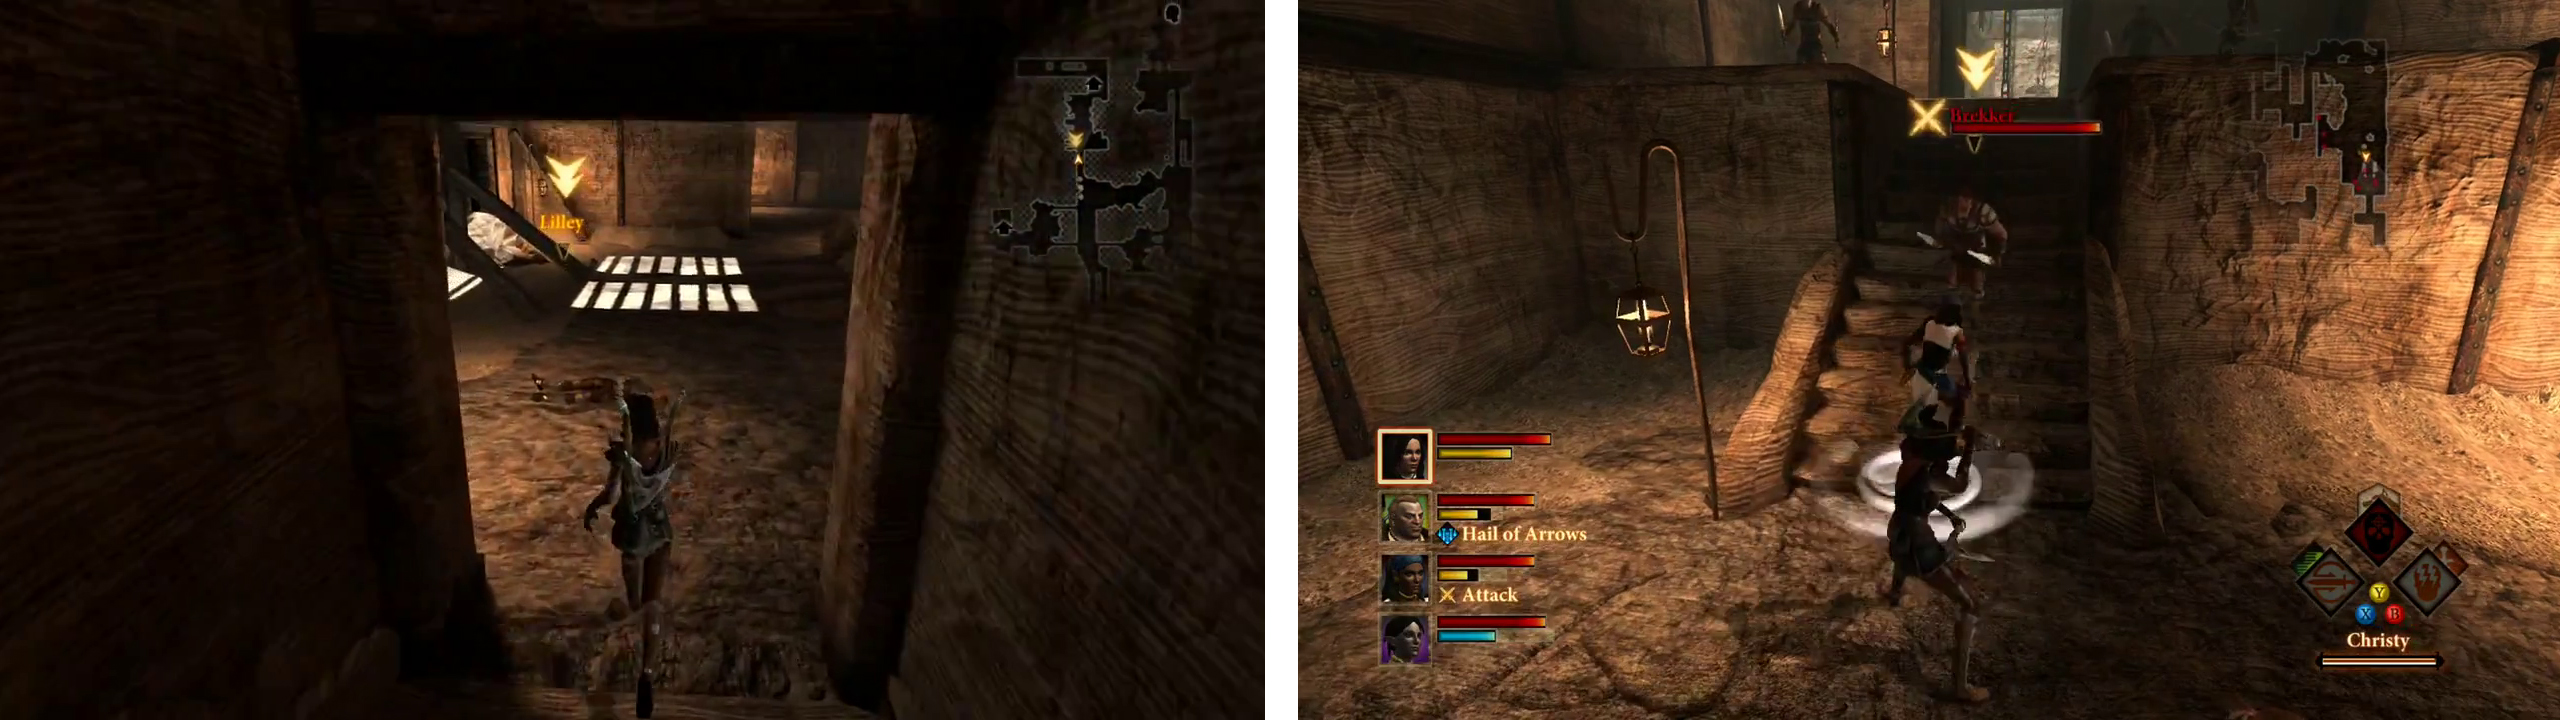 After finding Lilley (left), enter Brekker’s Hideout and kill Brekker at the end (right).